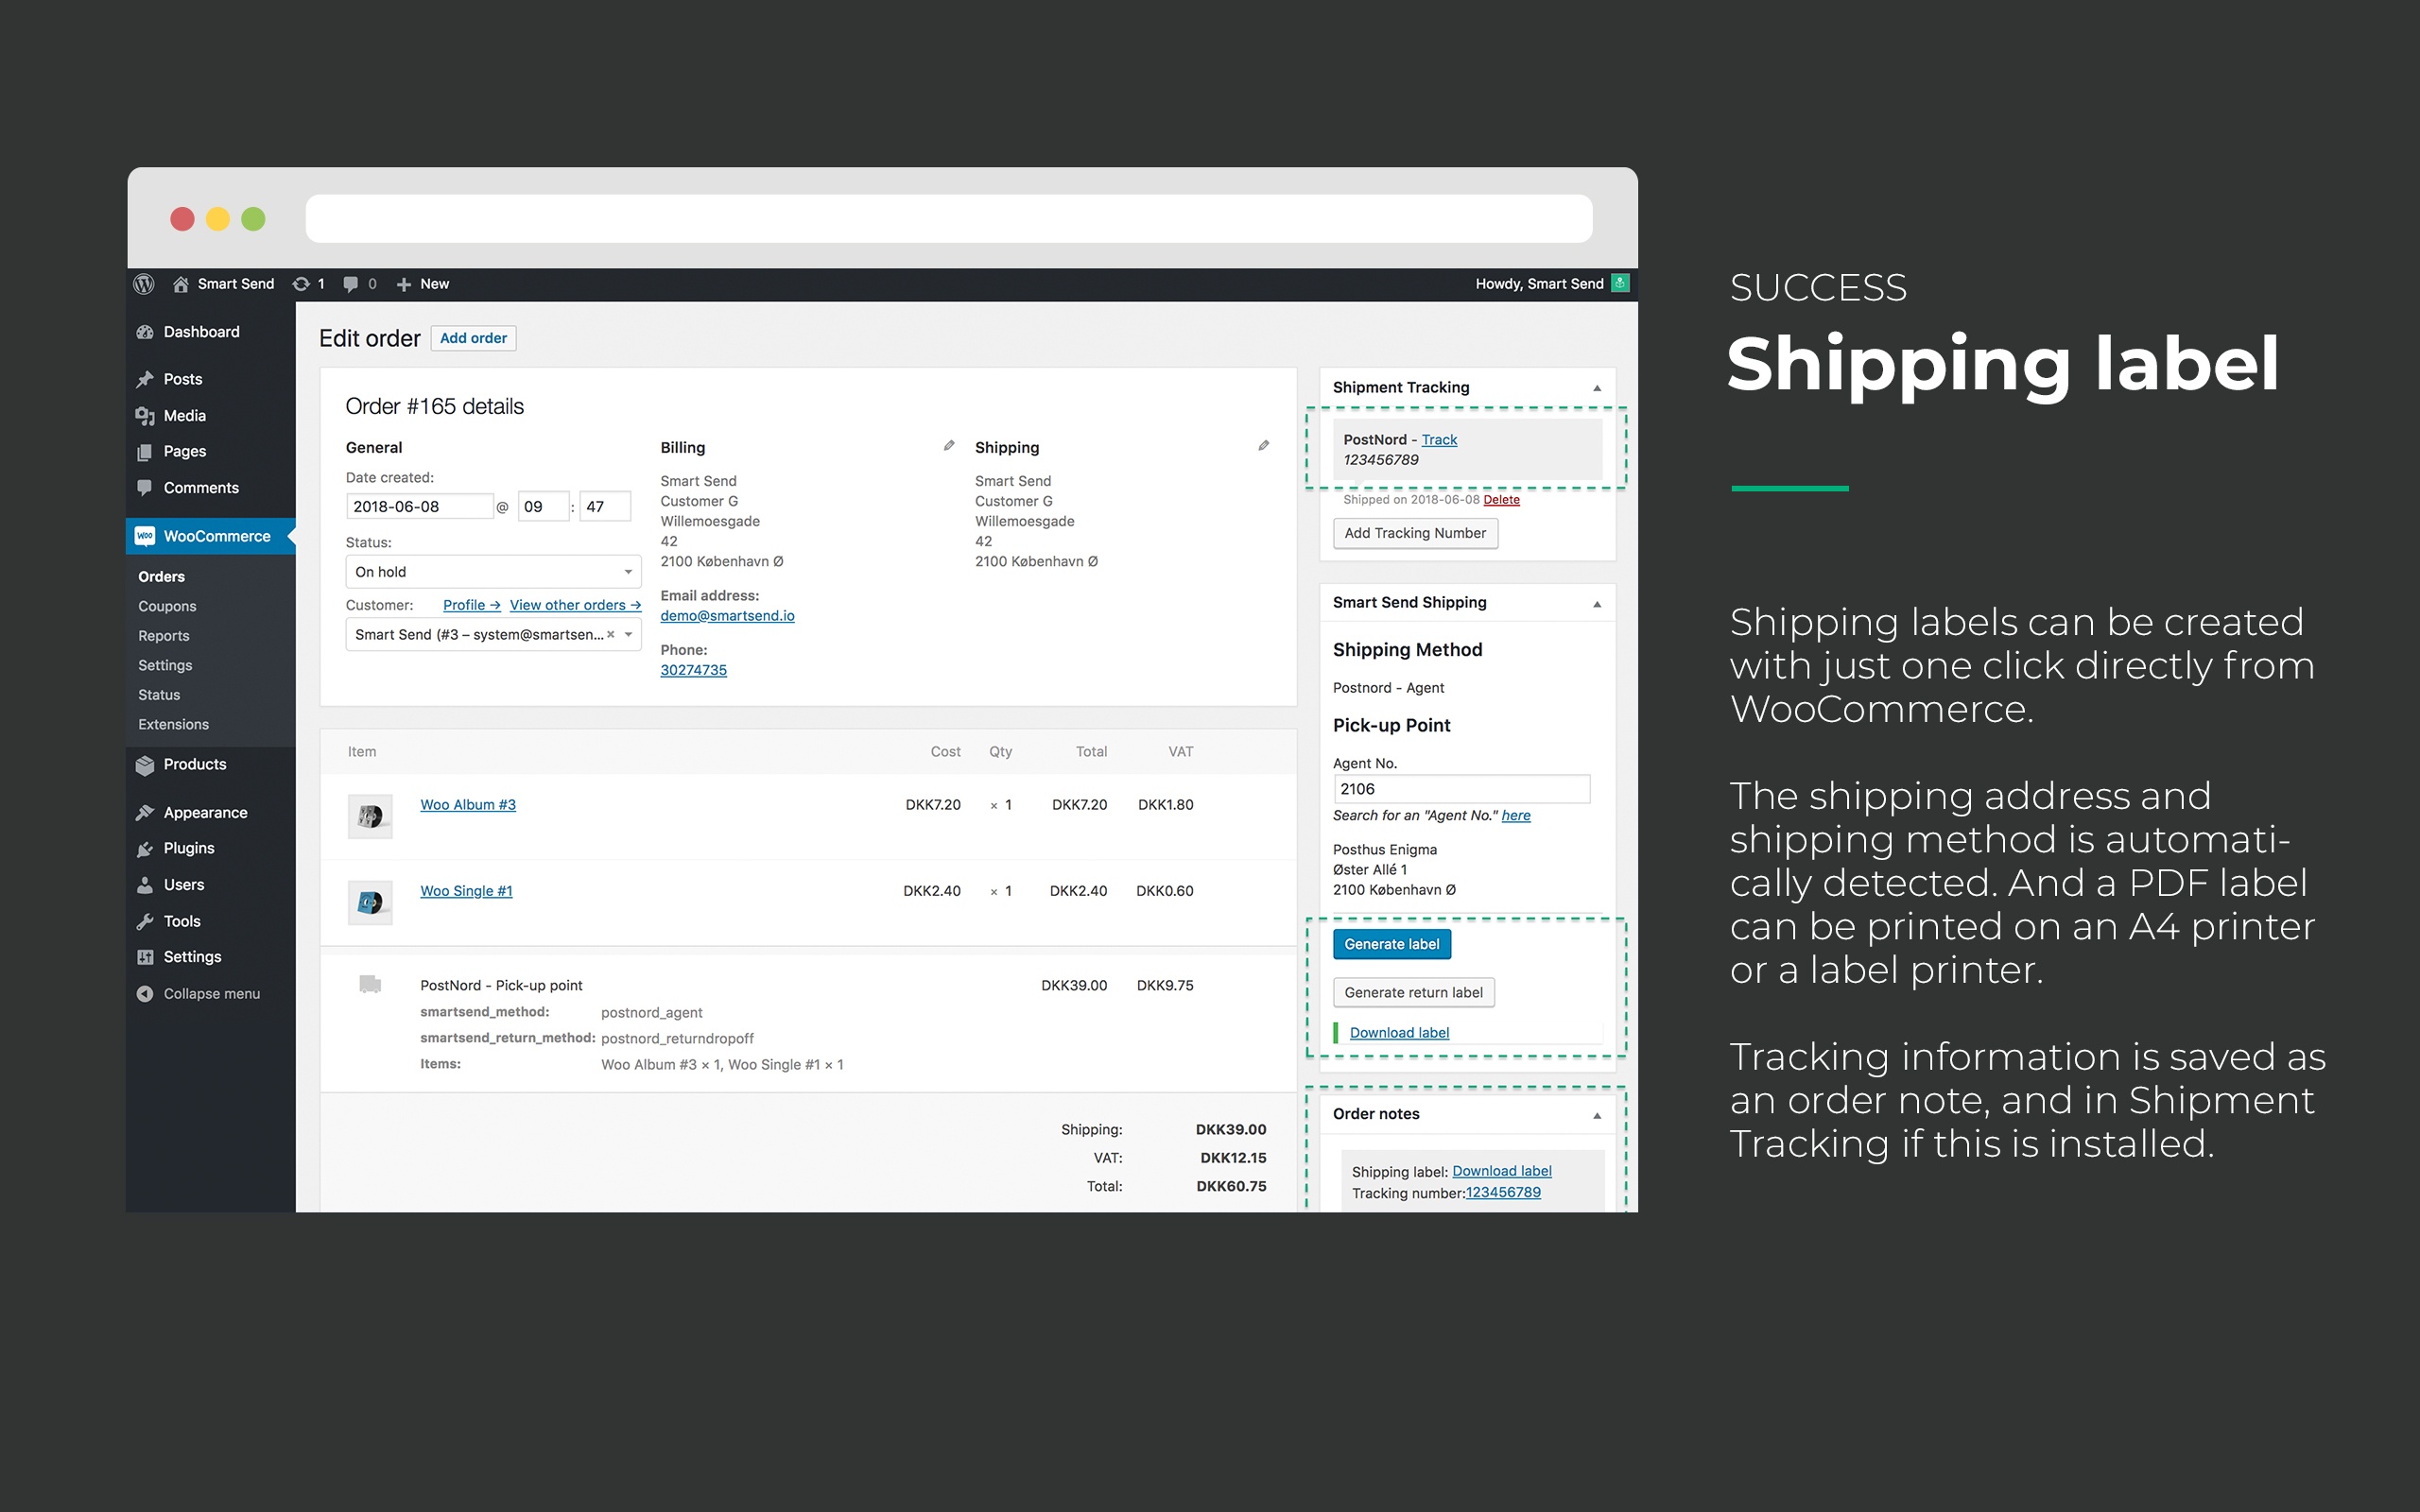 Create shipping labels from the order